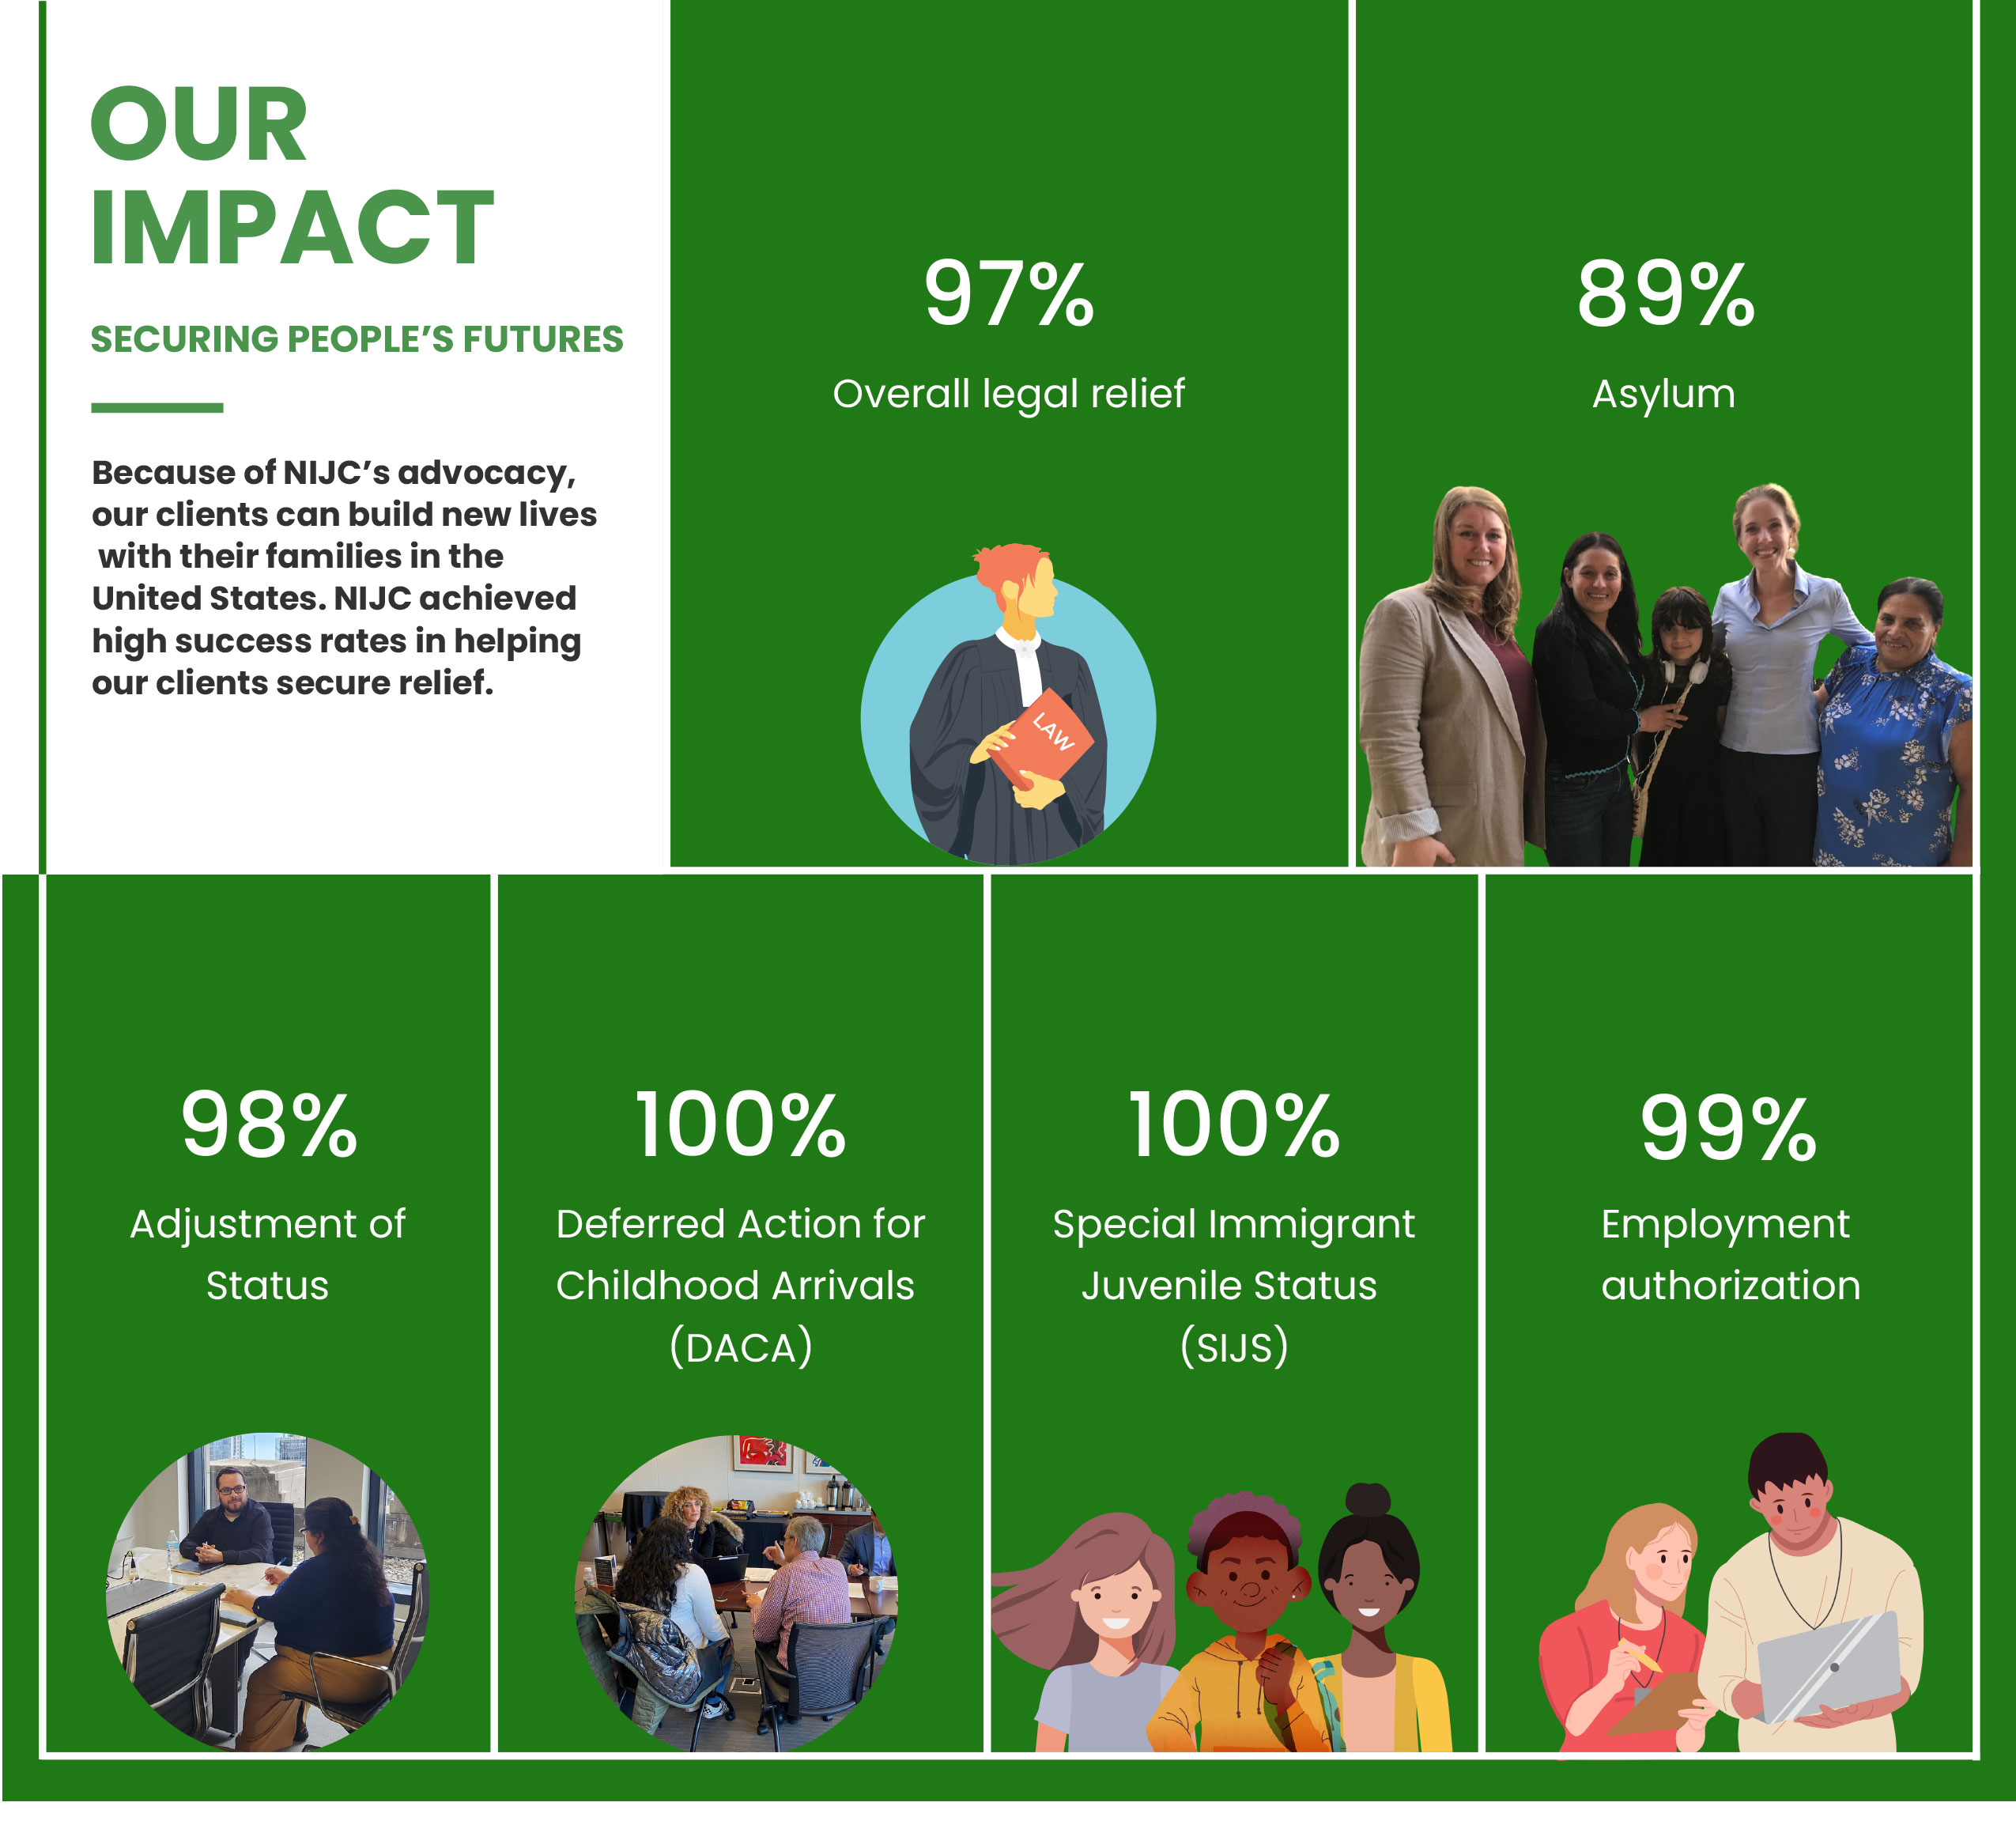 Graphic titled "Our Impact: Securing People's Futures" Introductory text reads "Because of NIJC's advocacy, our clients can build new lives with their families in the United States. NIJC achieved high success rates in helping our clients secure relief. Success rates for different forms of relief were: 97% overall; 98% for asylum; 98% for adjustment of status; 100% for Deferred Action for Childhood Arrivals; 100% for Special Immigrant Juvenile Status; 99% for employment authorization